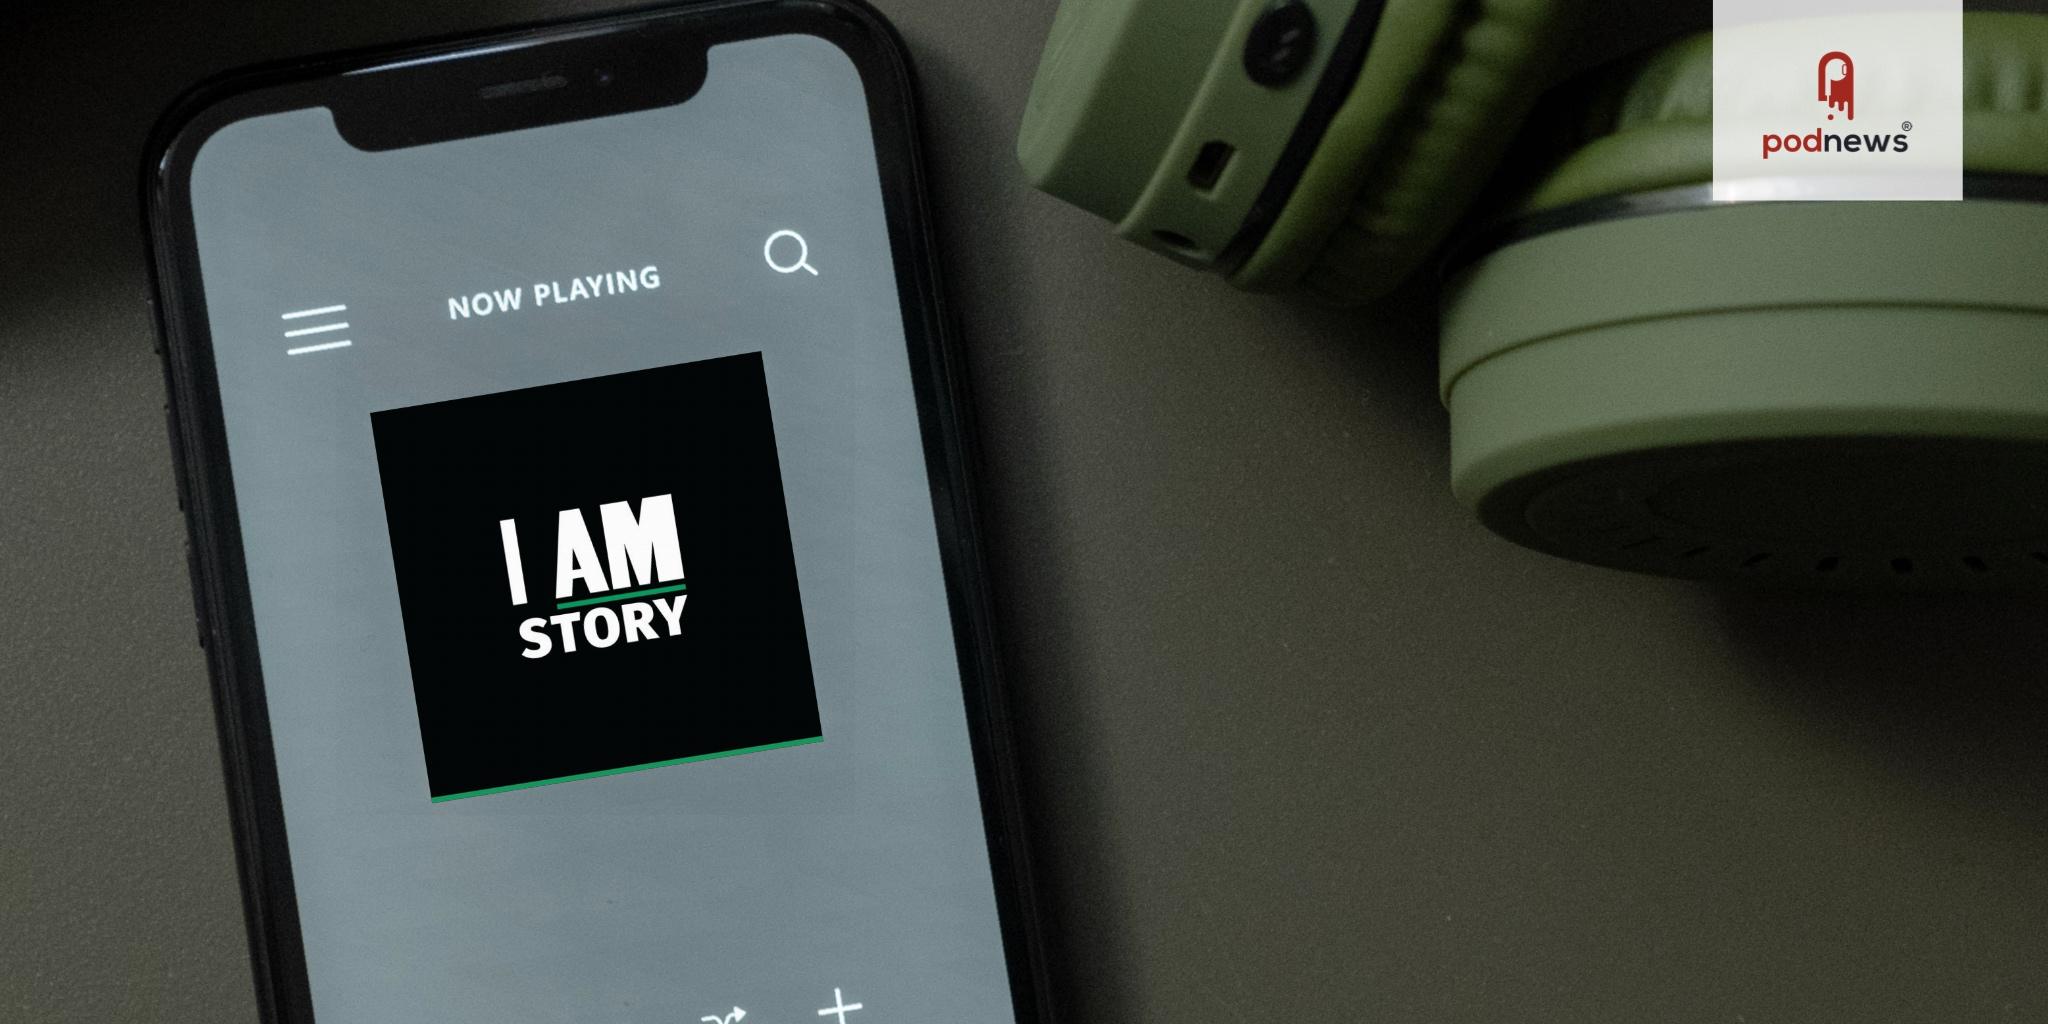 On the 55th anniversary of Dr. Martin Luther King Jr.’s assassination, AFSCME launches I AM Story podcast